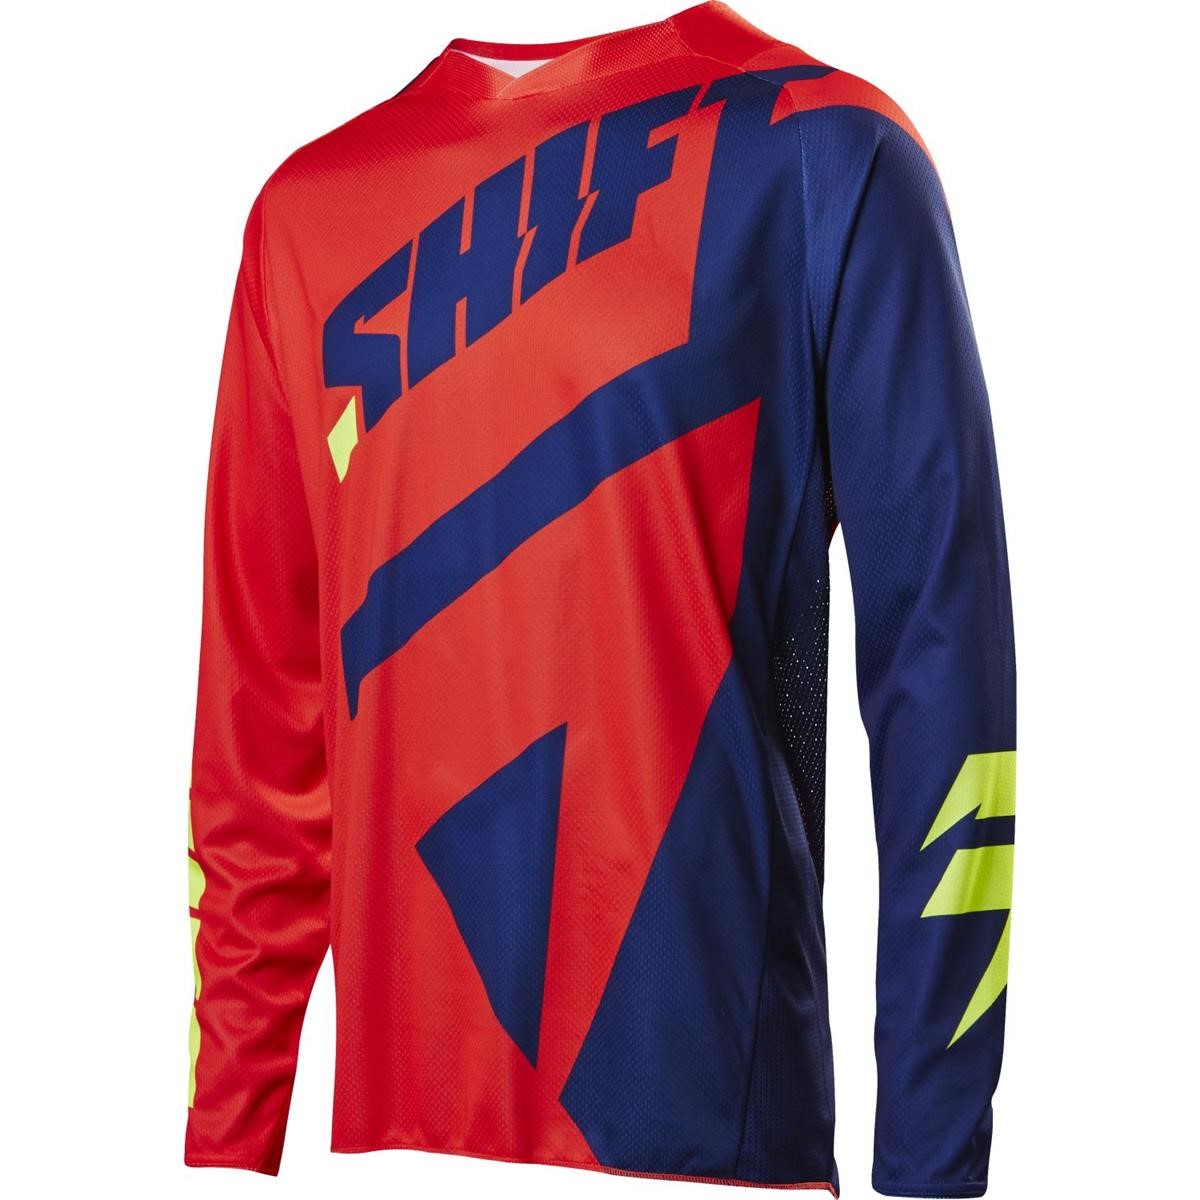 Shift Maillot MX 3lack Navy/Red - Mainline